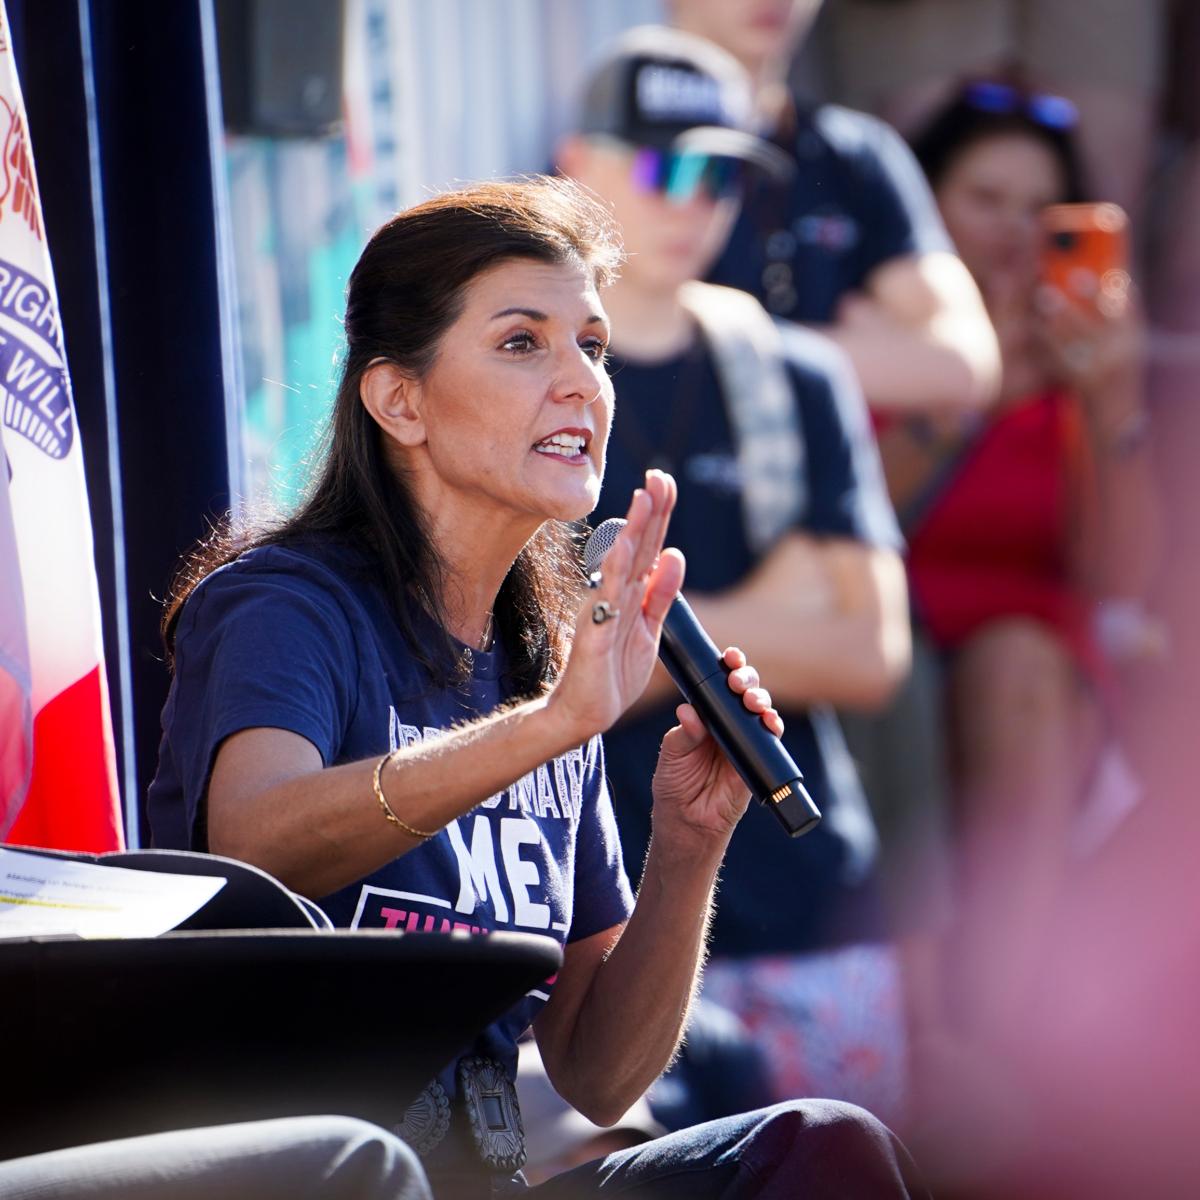  Republican presidential candidate and former South Carolina Gov. Nikki Haley speaks at the Iowa State Fair in Des Moines, Iowa, on Aug. 12, 2023. (Madalina Vasiliu/The Epoch Times)